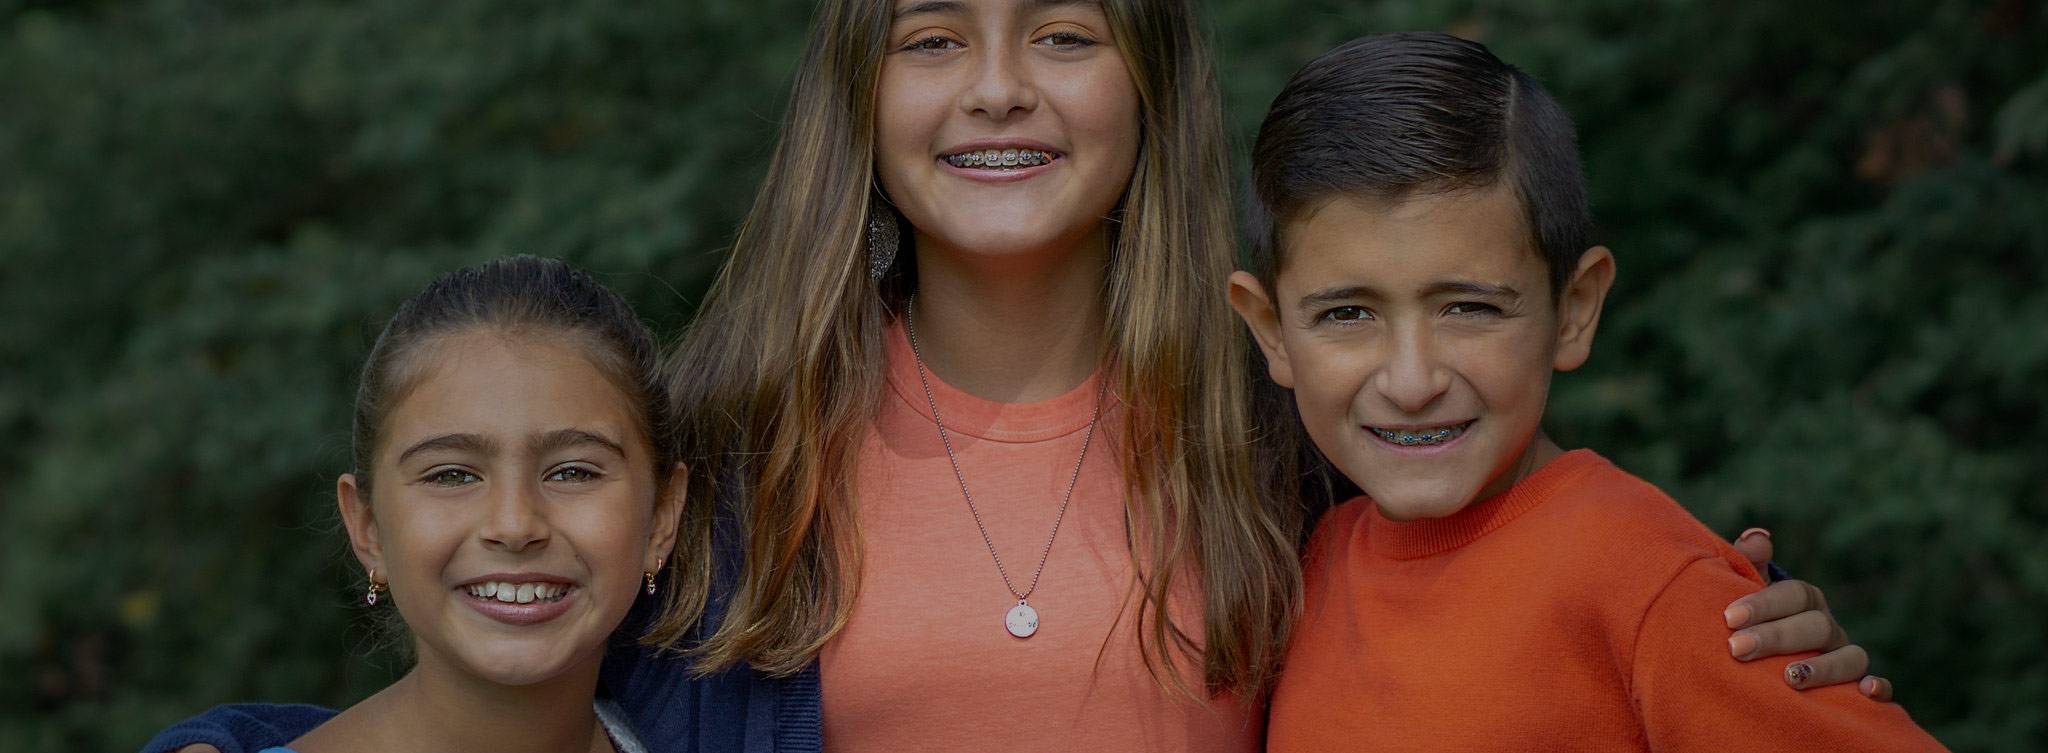 Everything You Need to Know About Palatal Expanders in Orthodontics -  Family Braces